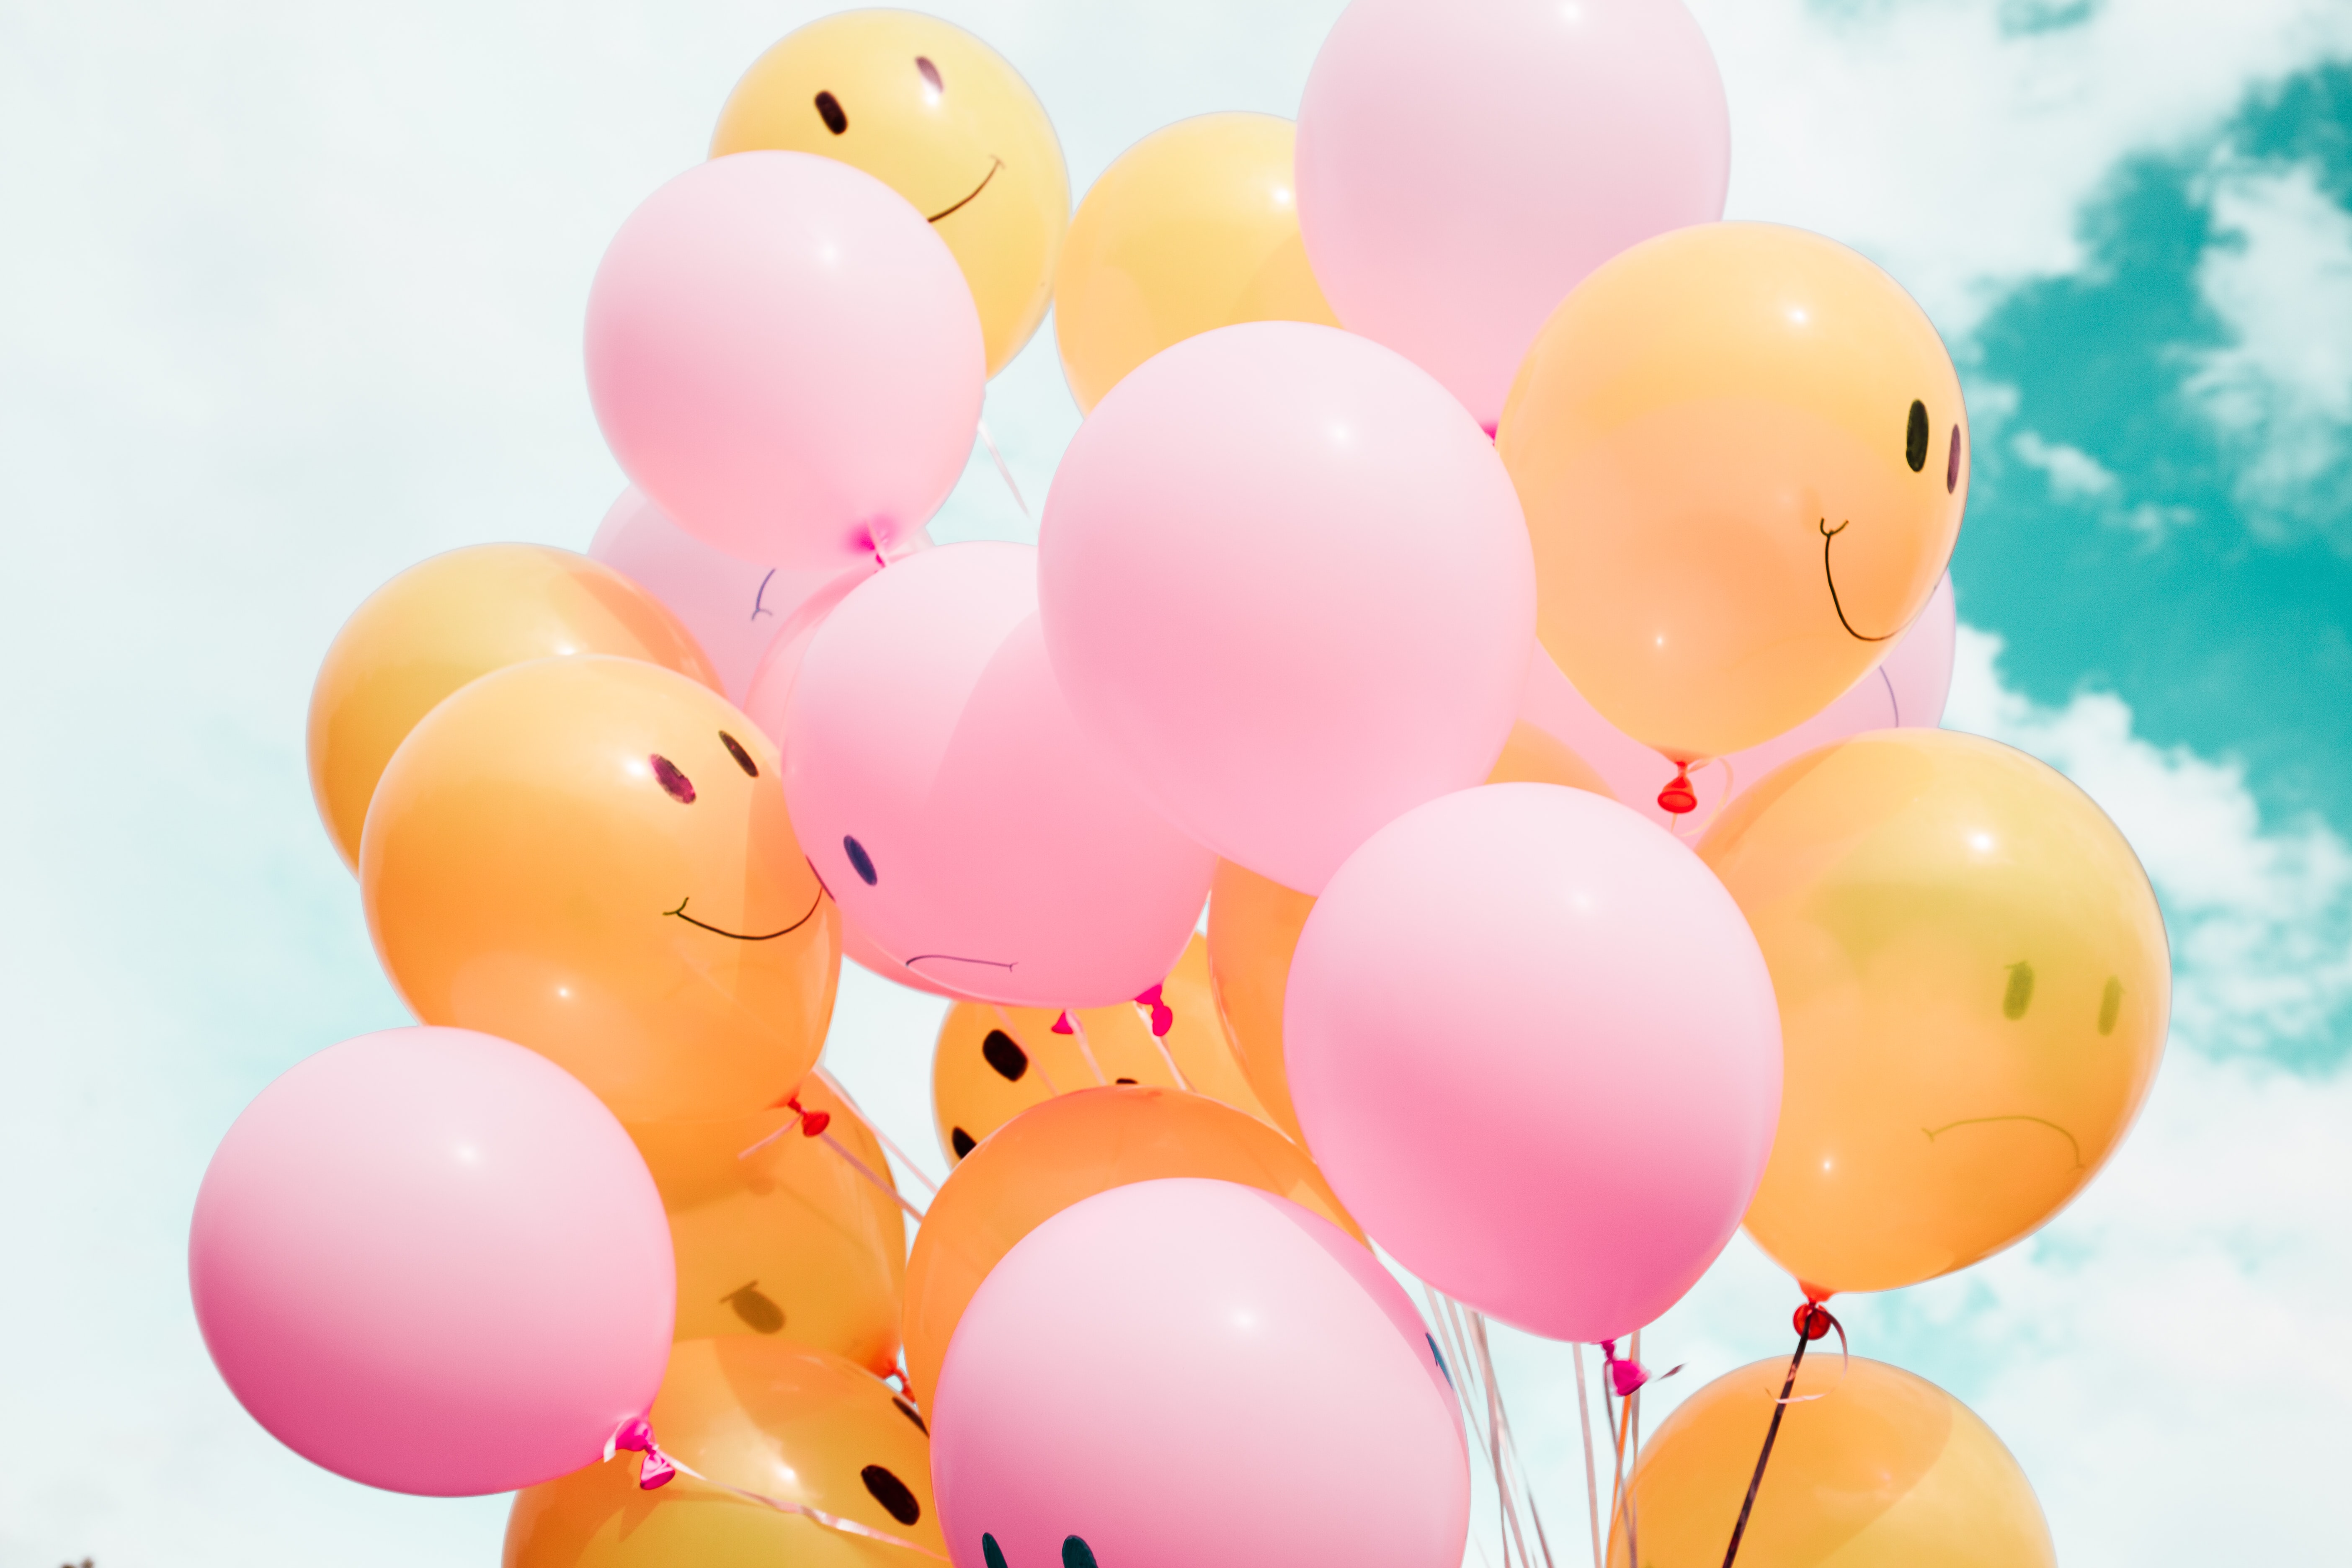 Some very happy looking balloons in front of a cloud. Kind of the way I'm happy in the cloud.